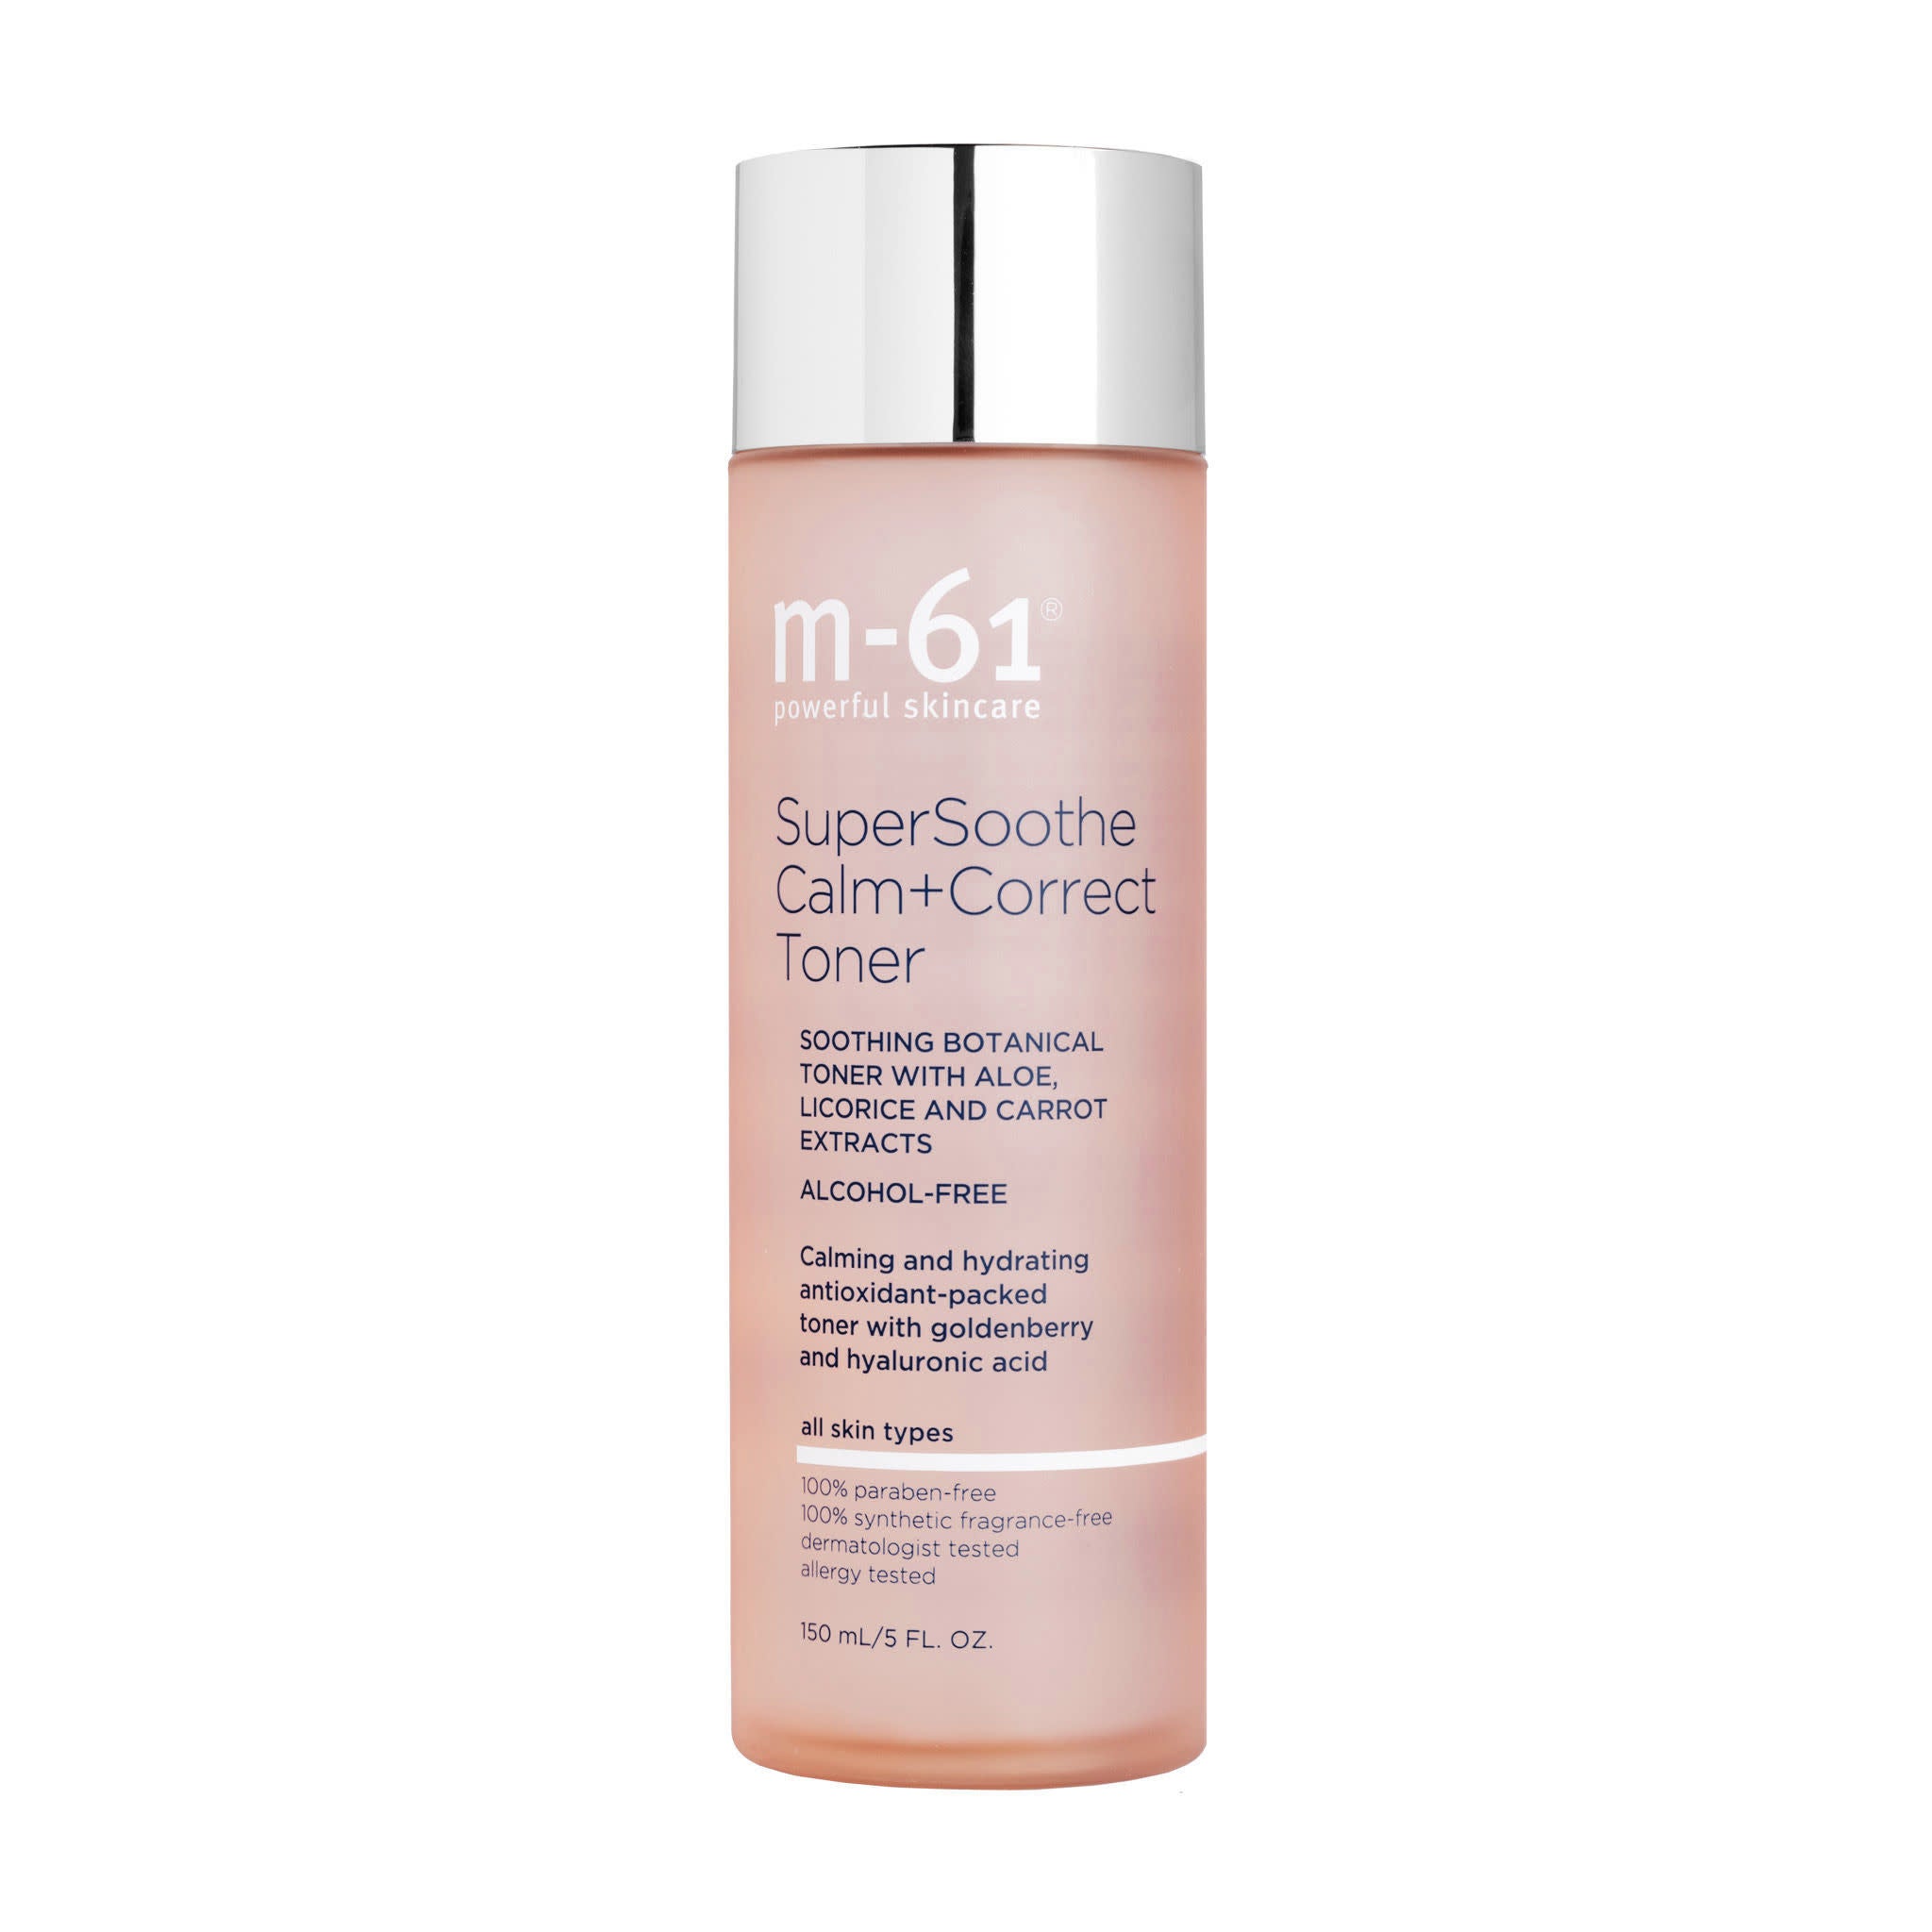 M-61 SuperSoothe Calm+Correct Toner main image.